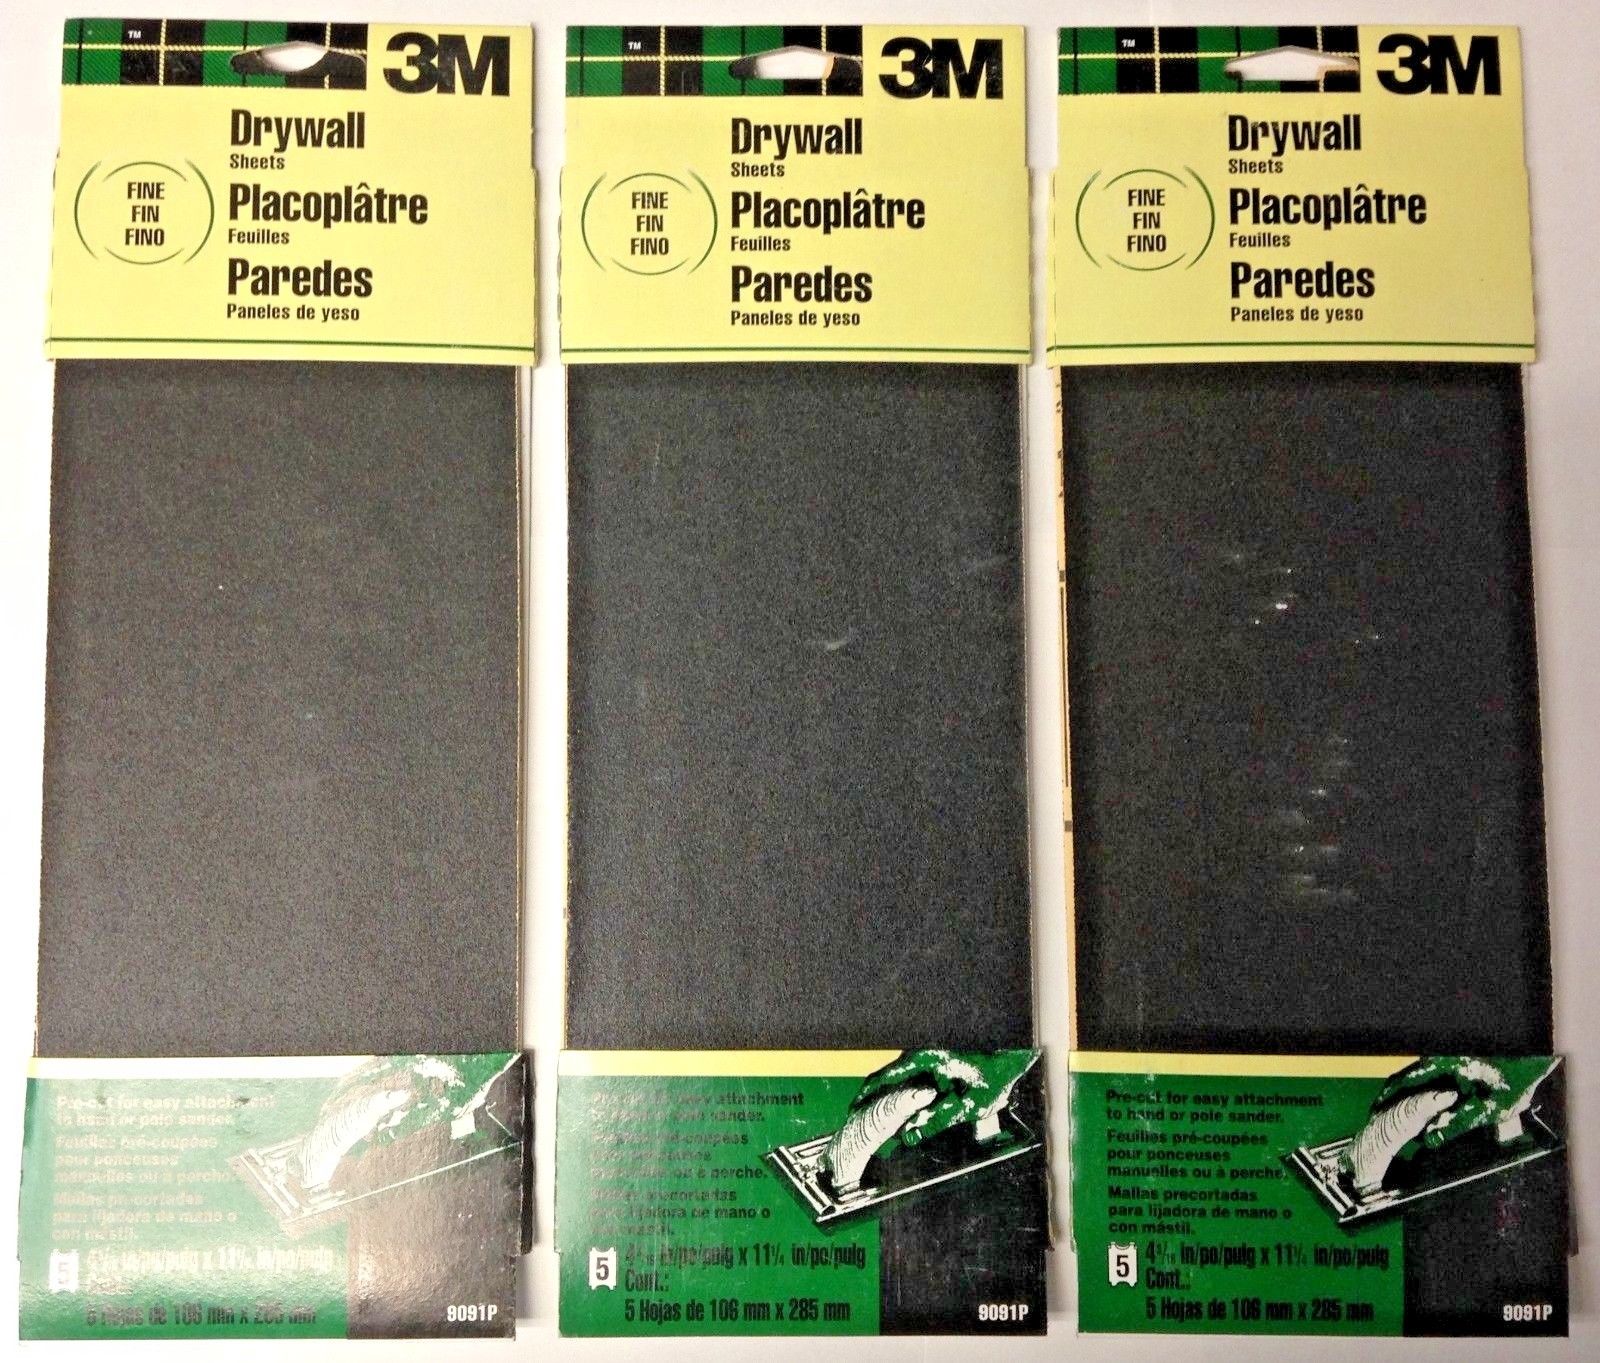 3M 9091P 4-3/16" x  11-1/4" Fine Drywall Sanding Sheets 3 Packs of 5 (15 Sheets)